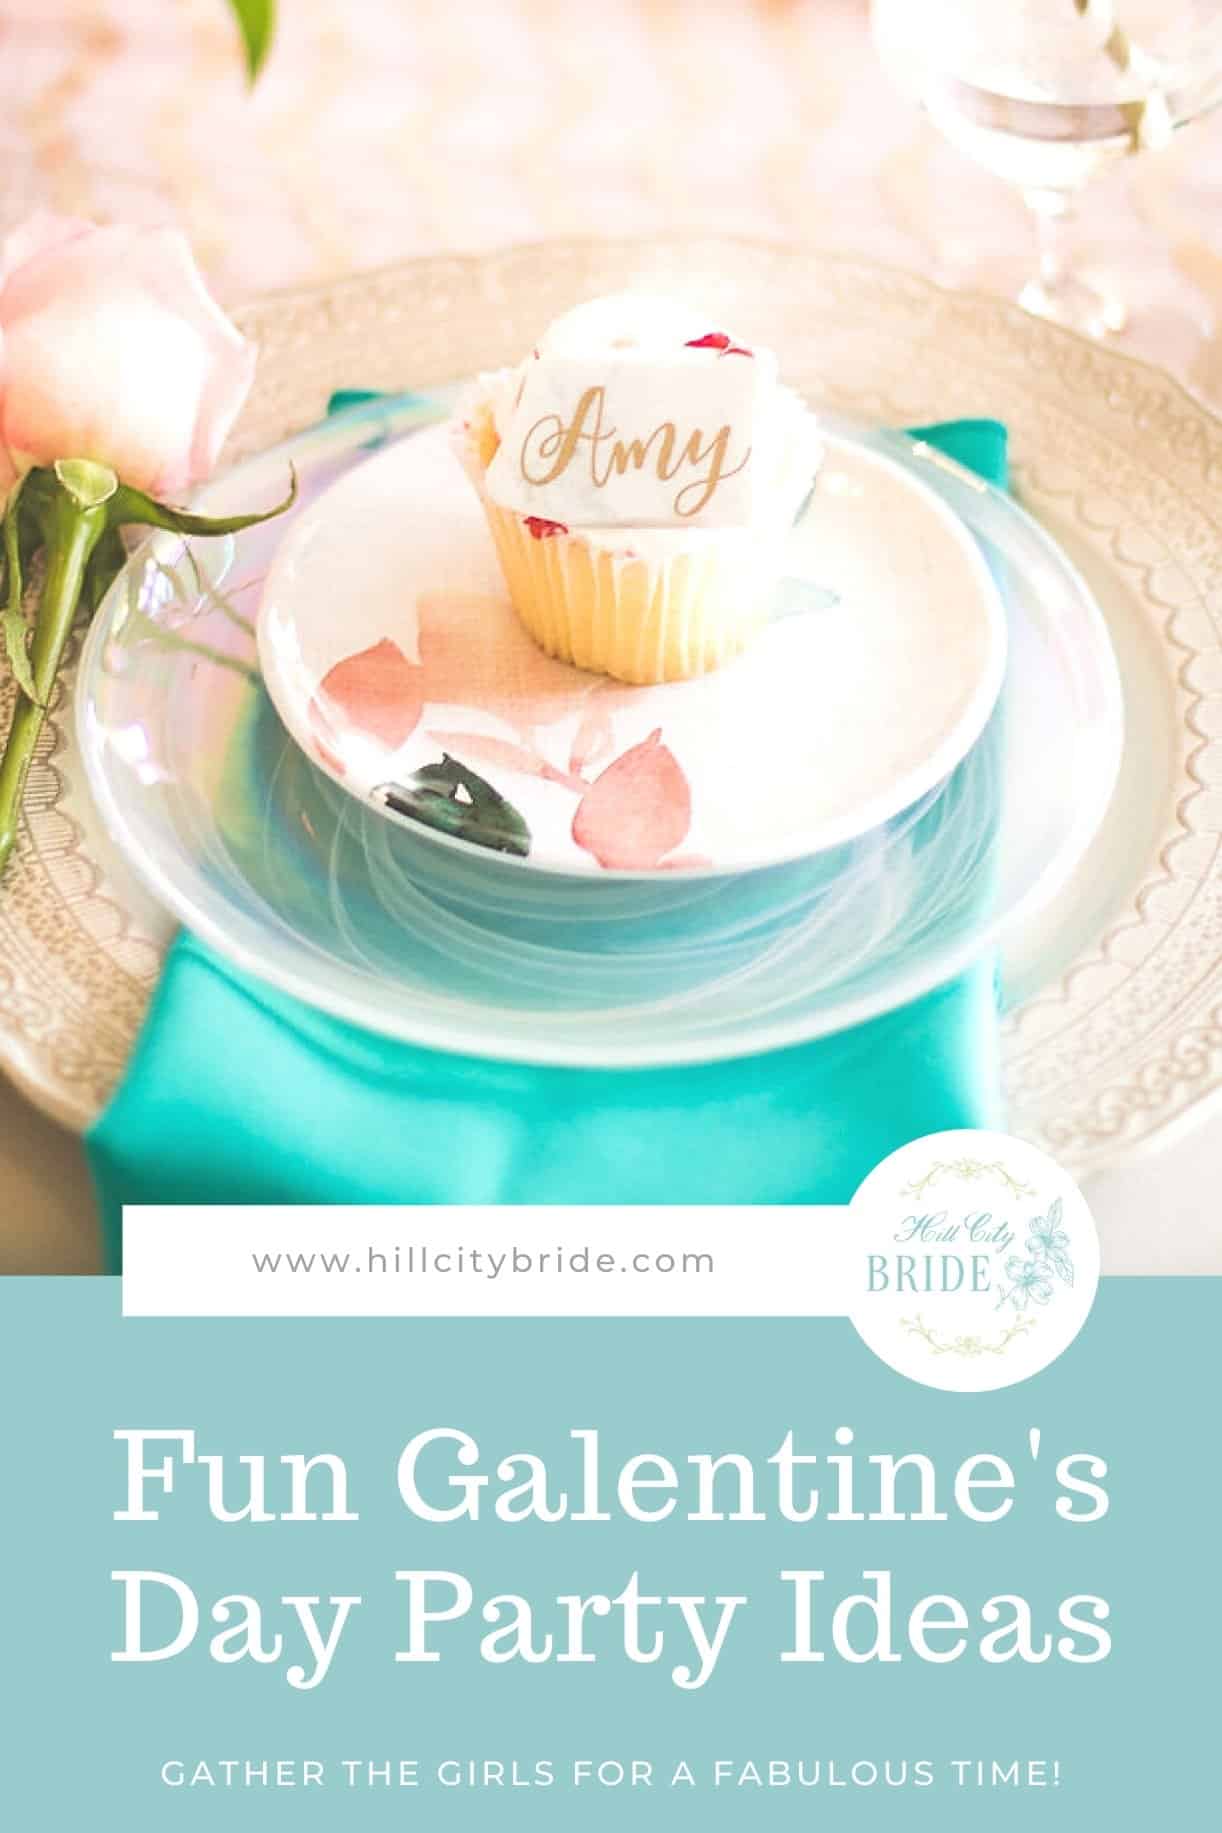 Best Galentine's Day Party Ideas